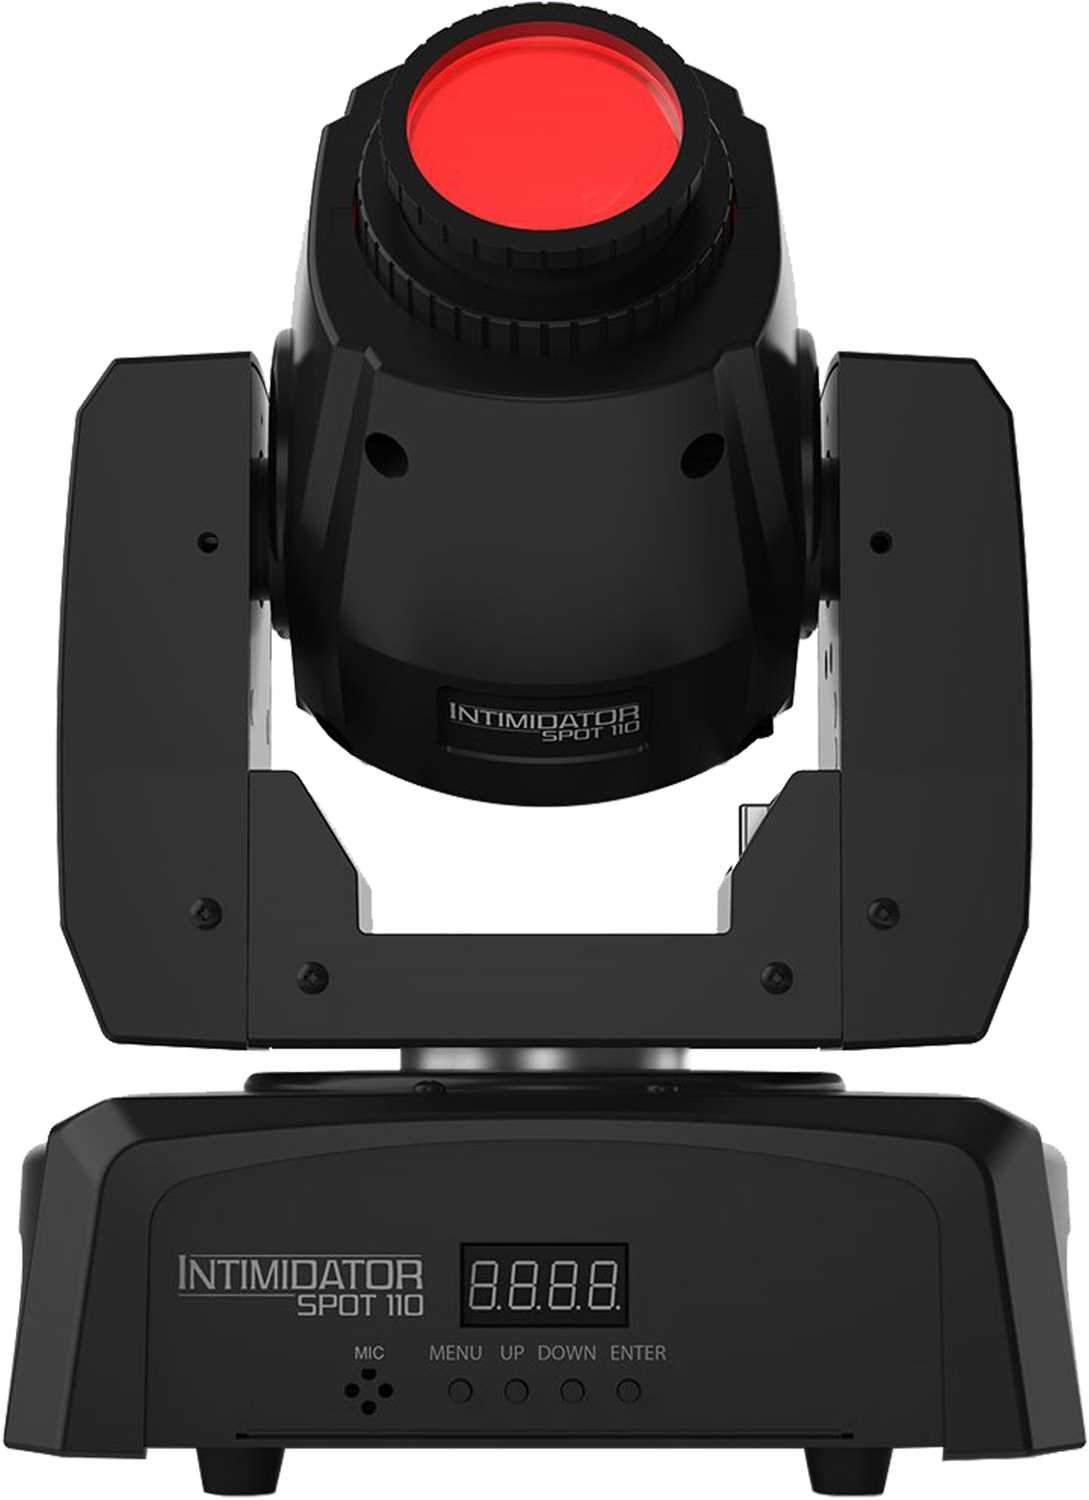 Chauvet Intimidator Spot 110 LED Moving Head 4-Pack - PSSL ProSound and Stage Lighting